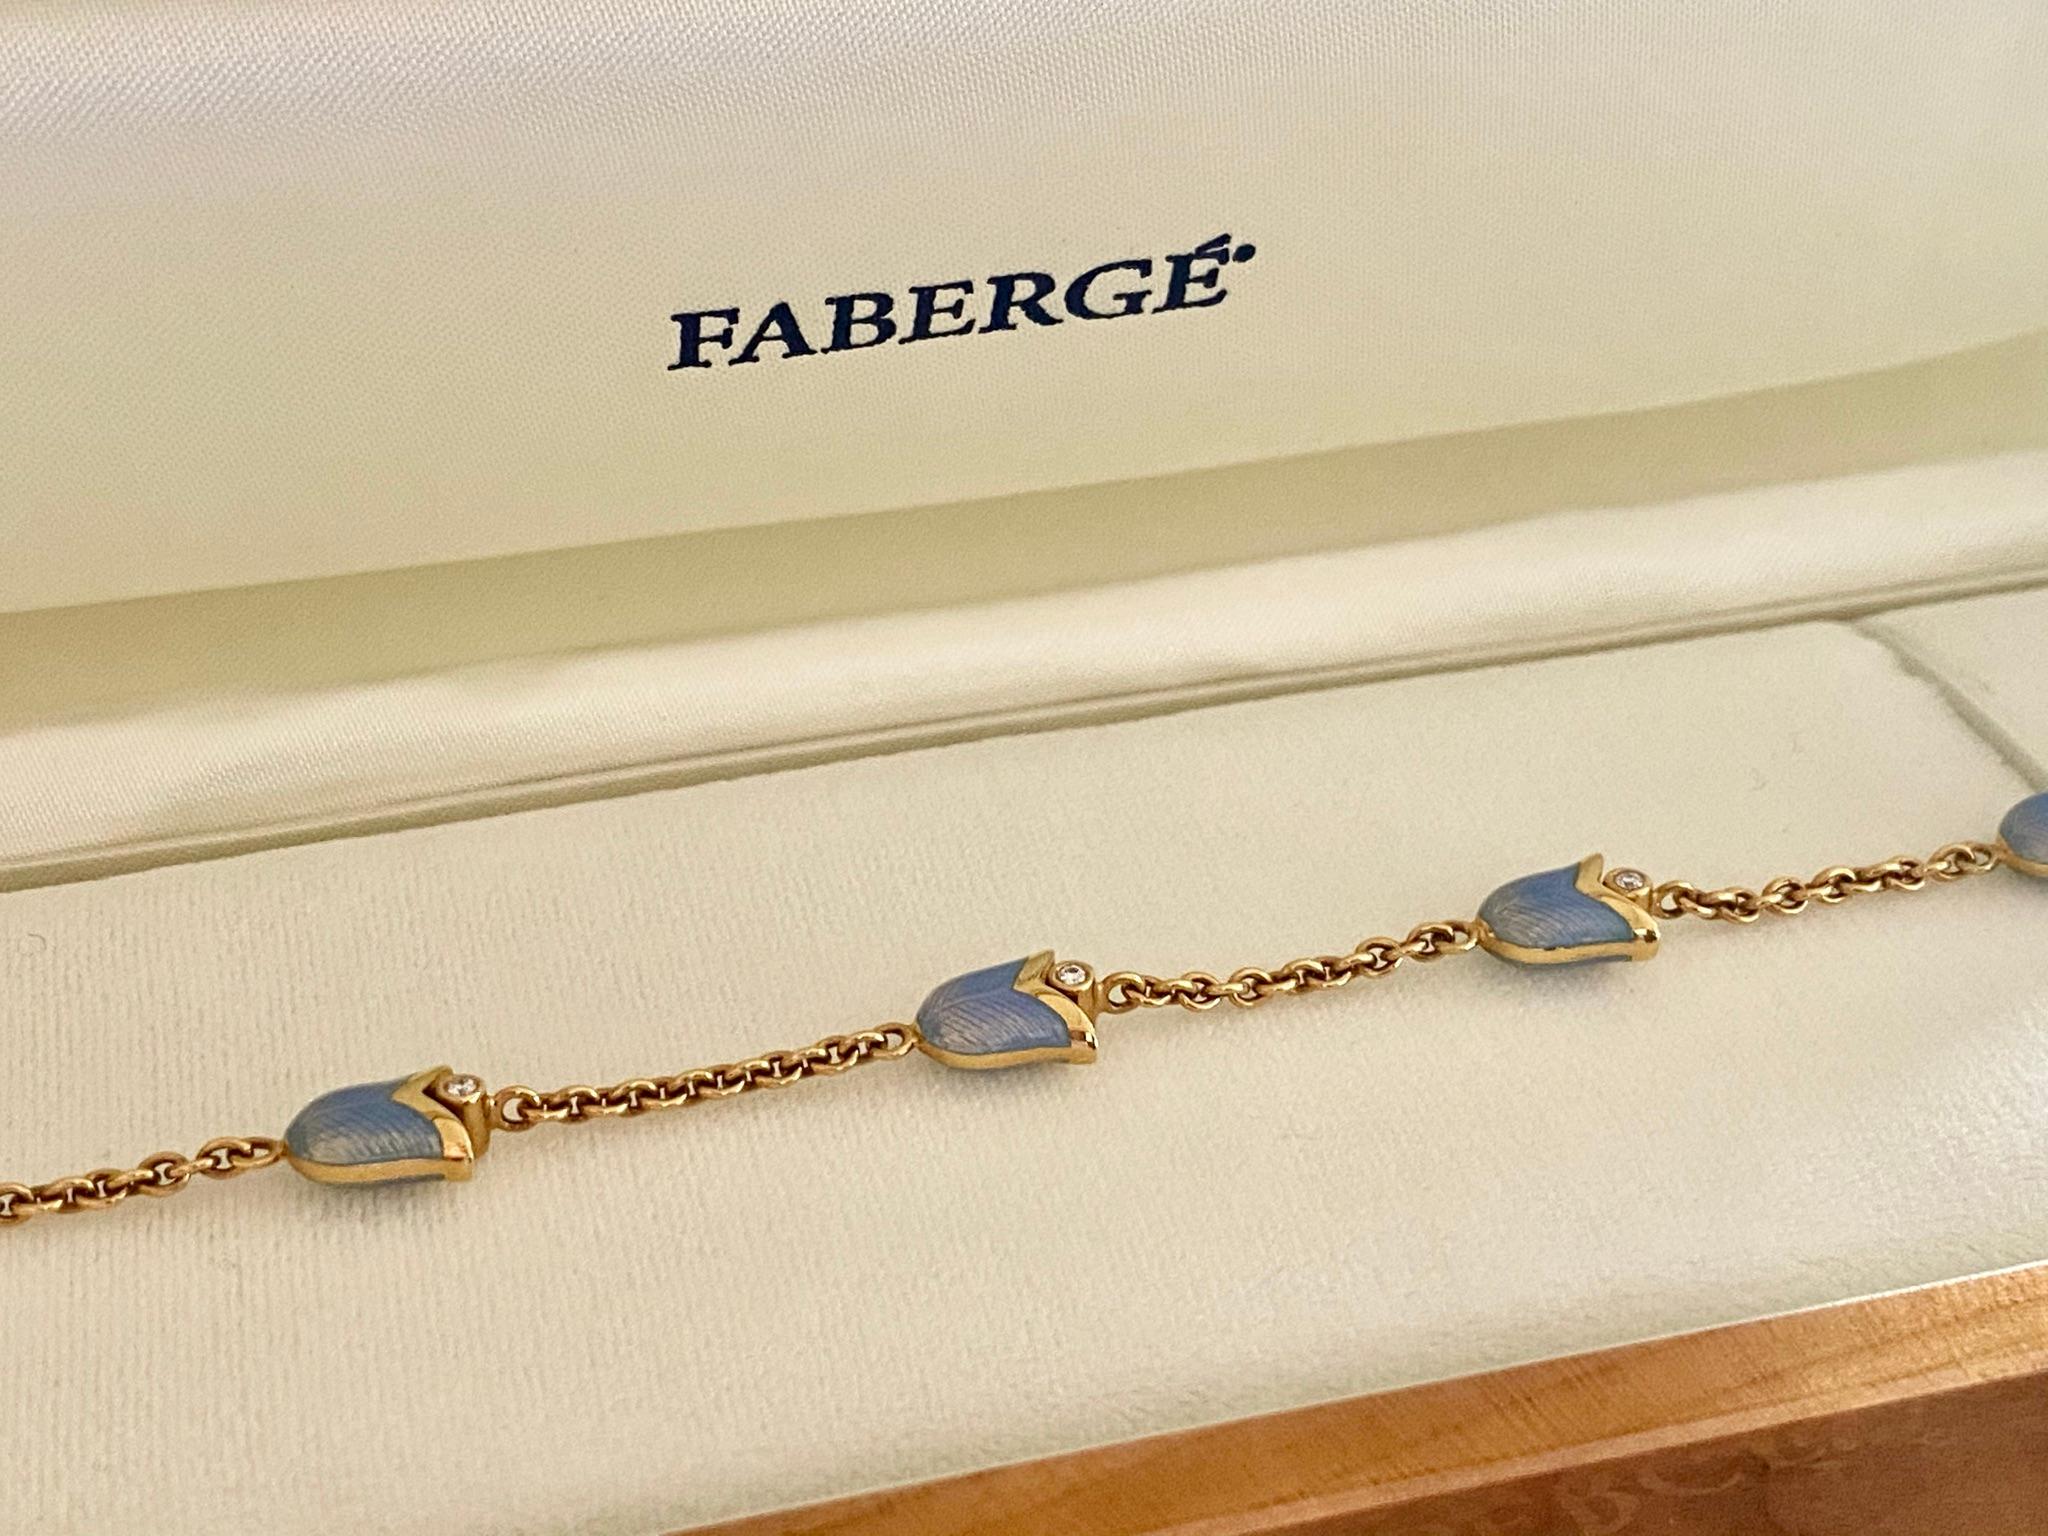 One (1) 18 Karat Gold Bracelet, stamped: 750 & Fabergé   (workmaster: Victor Mayer)
Chain set with 5 Lily of the Valley, with light blue enemal and set with 10 Round Brilliant Natural Diamonds
Weight: 13.62 grams
Lenght of the Bracelet: 19.3 cm  (